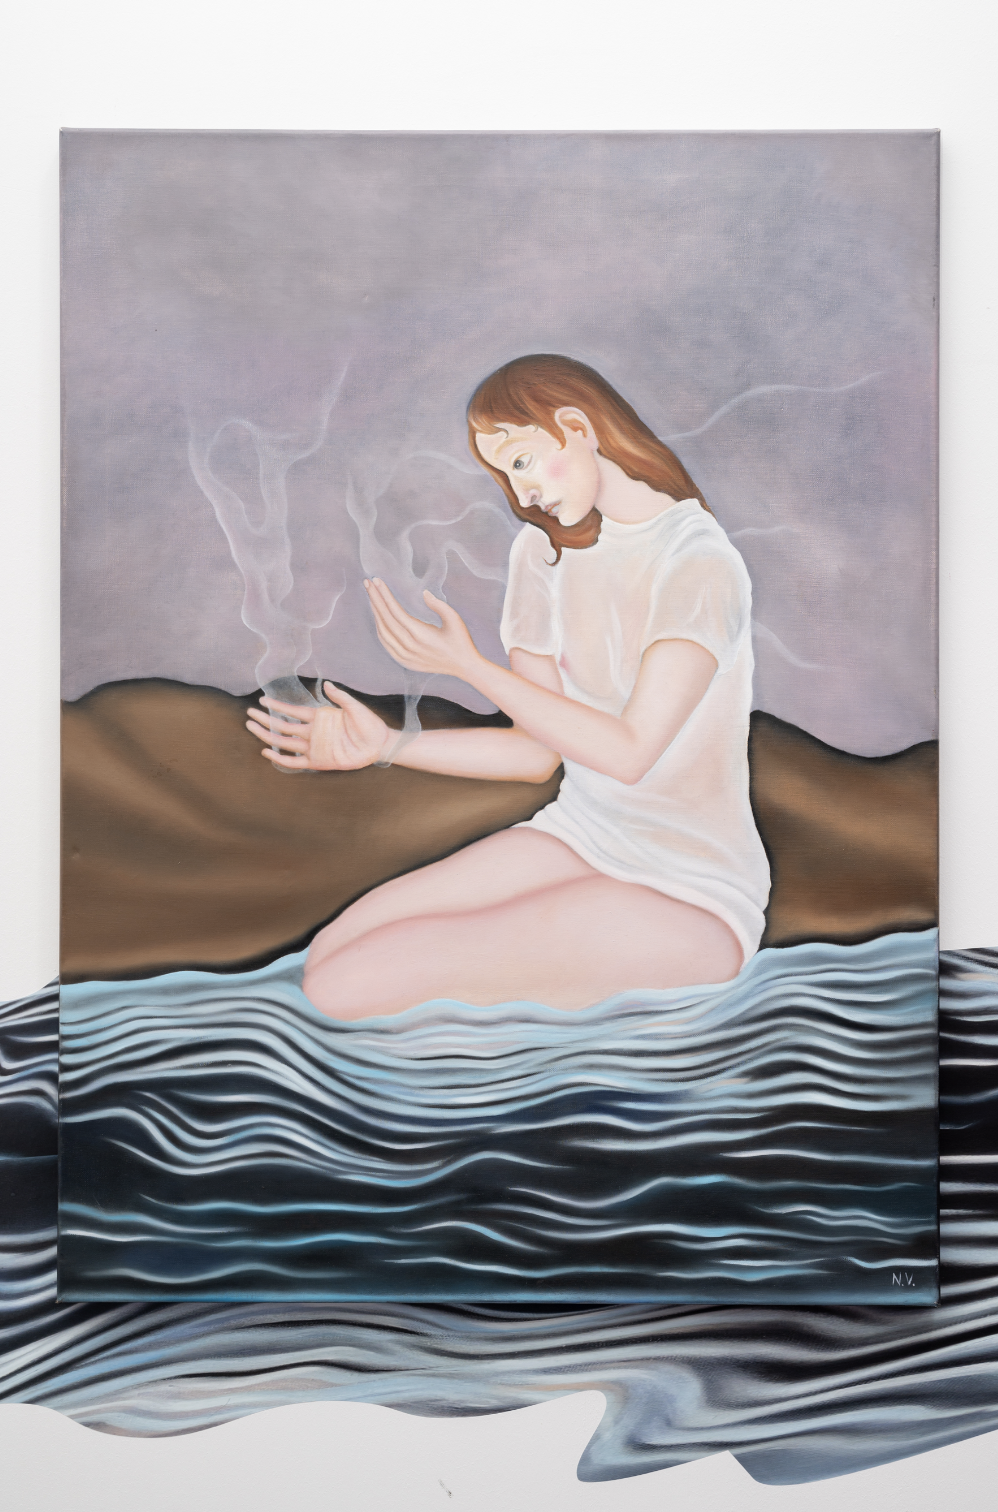 Nata Varazi, Untitled (What it feels like to be a girl), 2021 Oil on stretched canvas 90x70cm